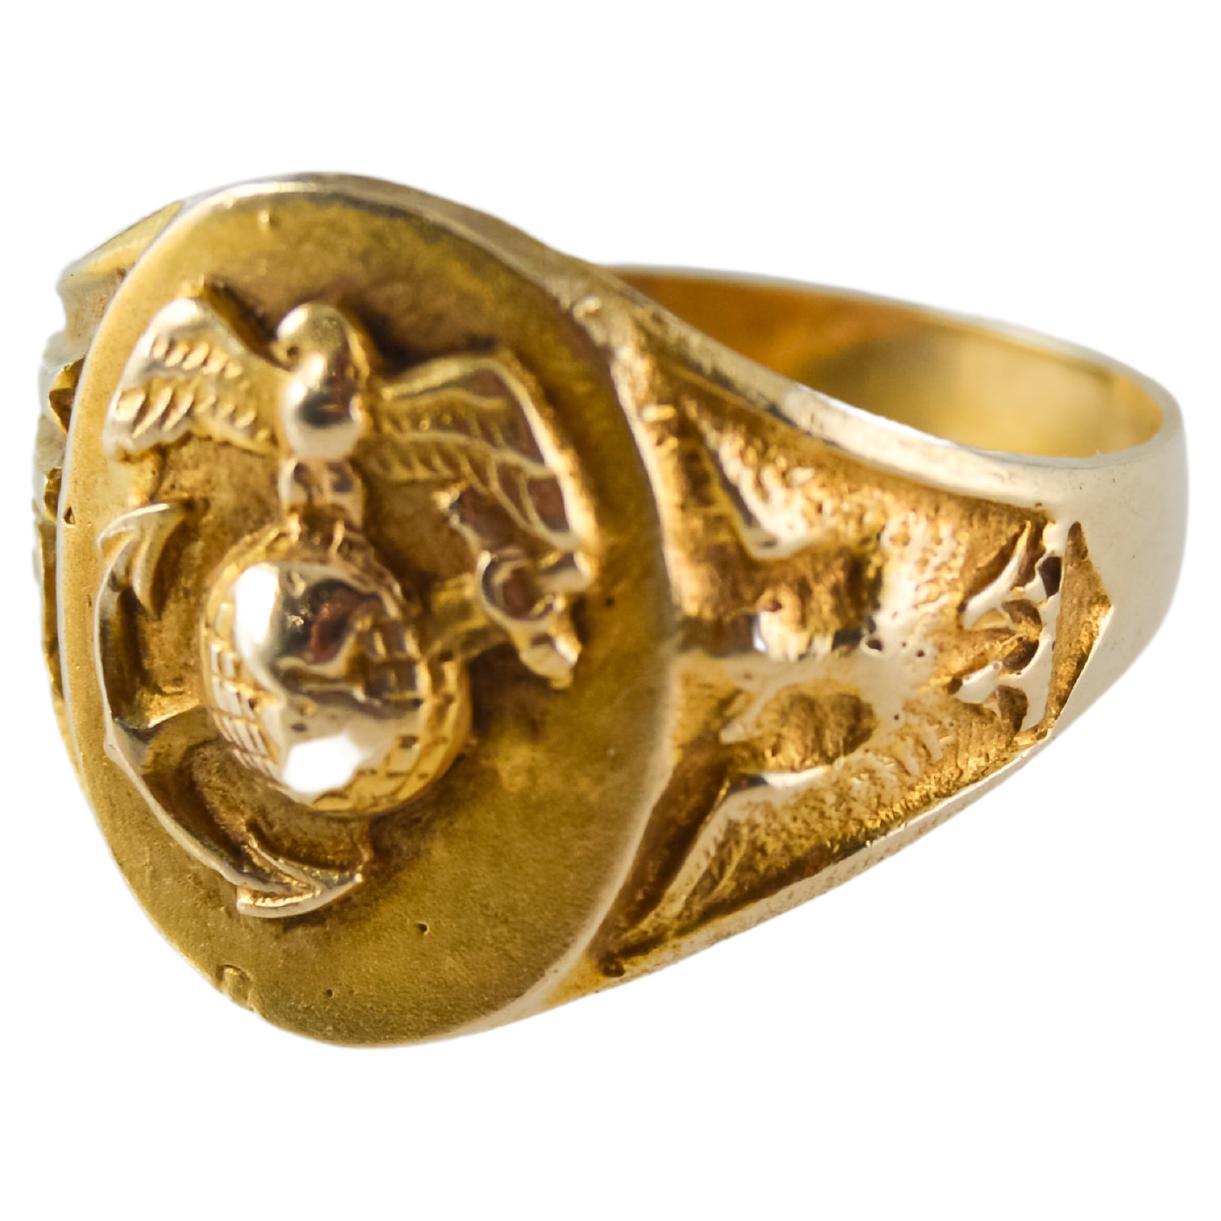 Art Deco 10 Karat Yellow Gold Signet Ring Sized to 6 1/2, 1930s, Hand Made For Sale 2